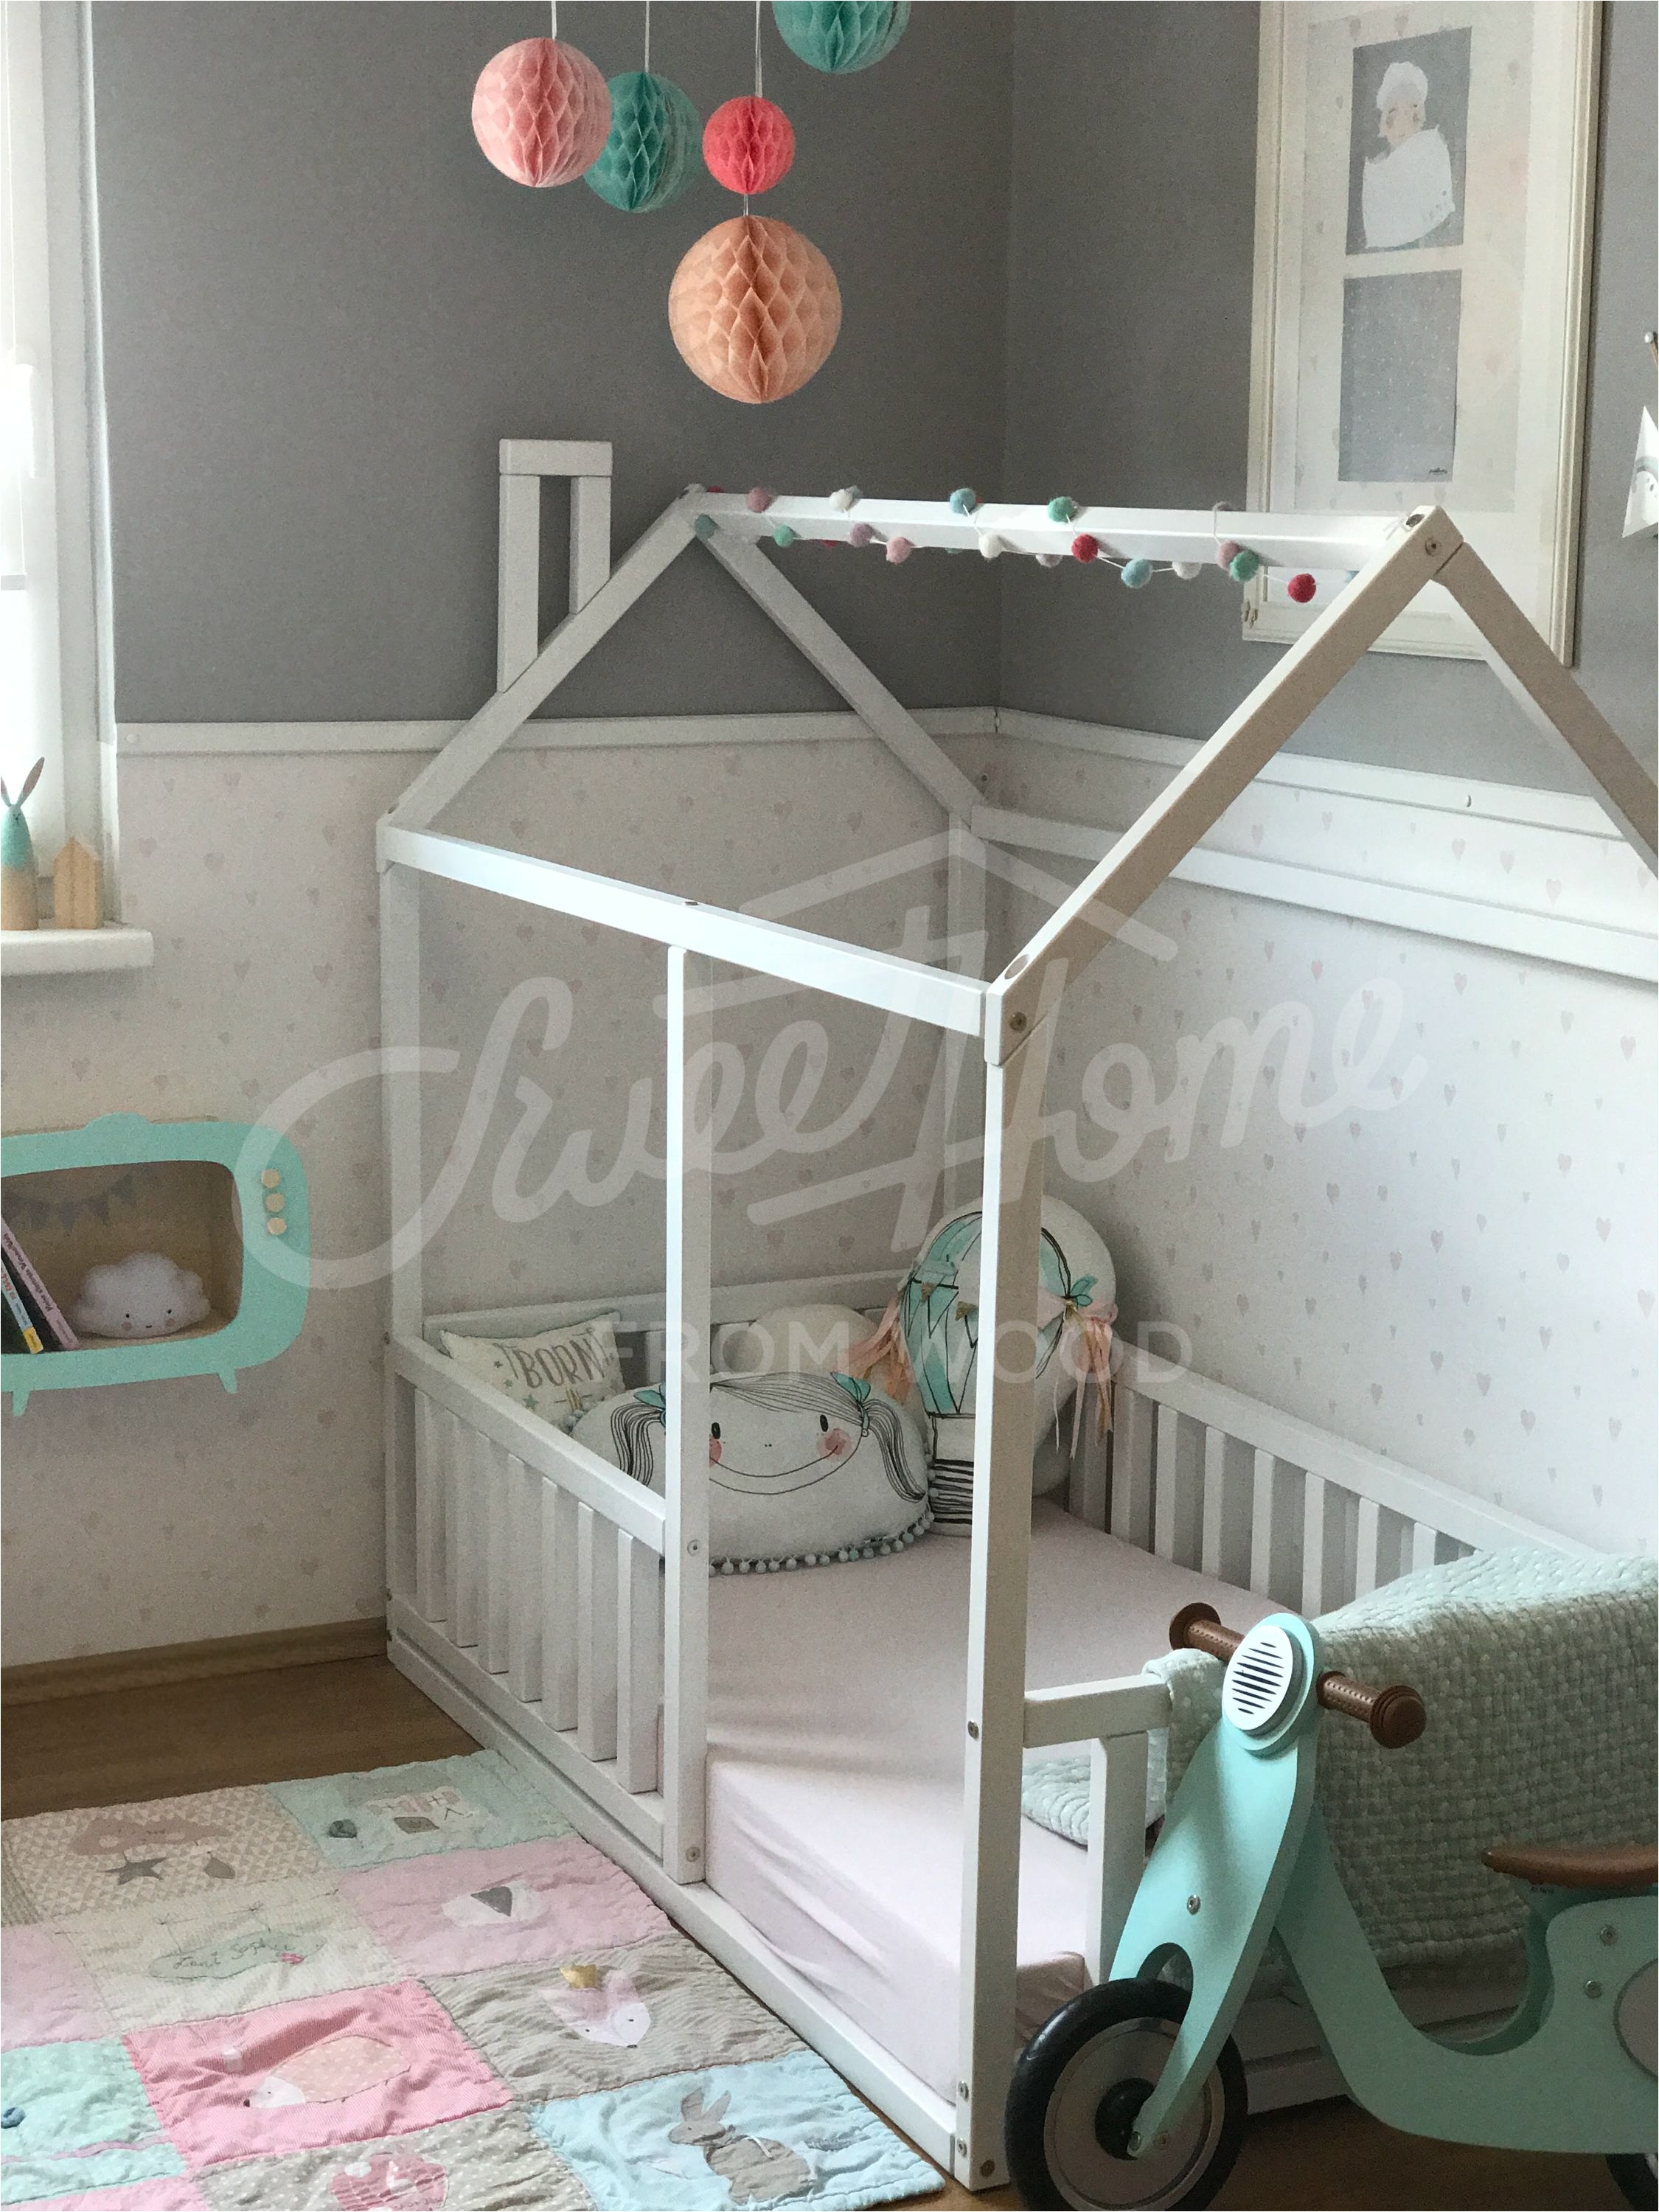 montessori toy baby bed toddler bed children bed house frame bed home bed nursery crib baby room play tent house bed wood house gift slats